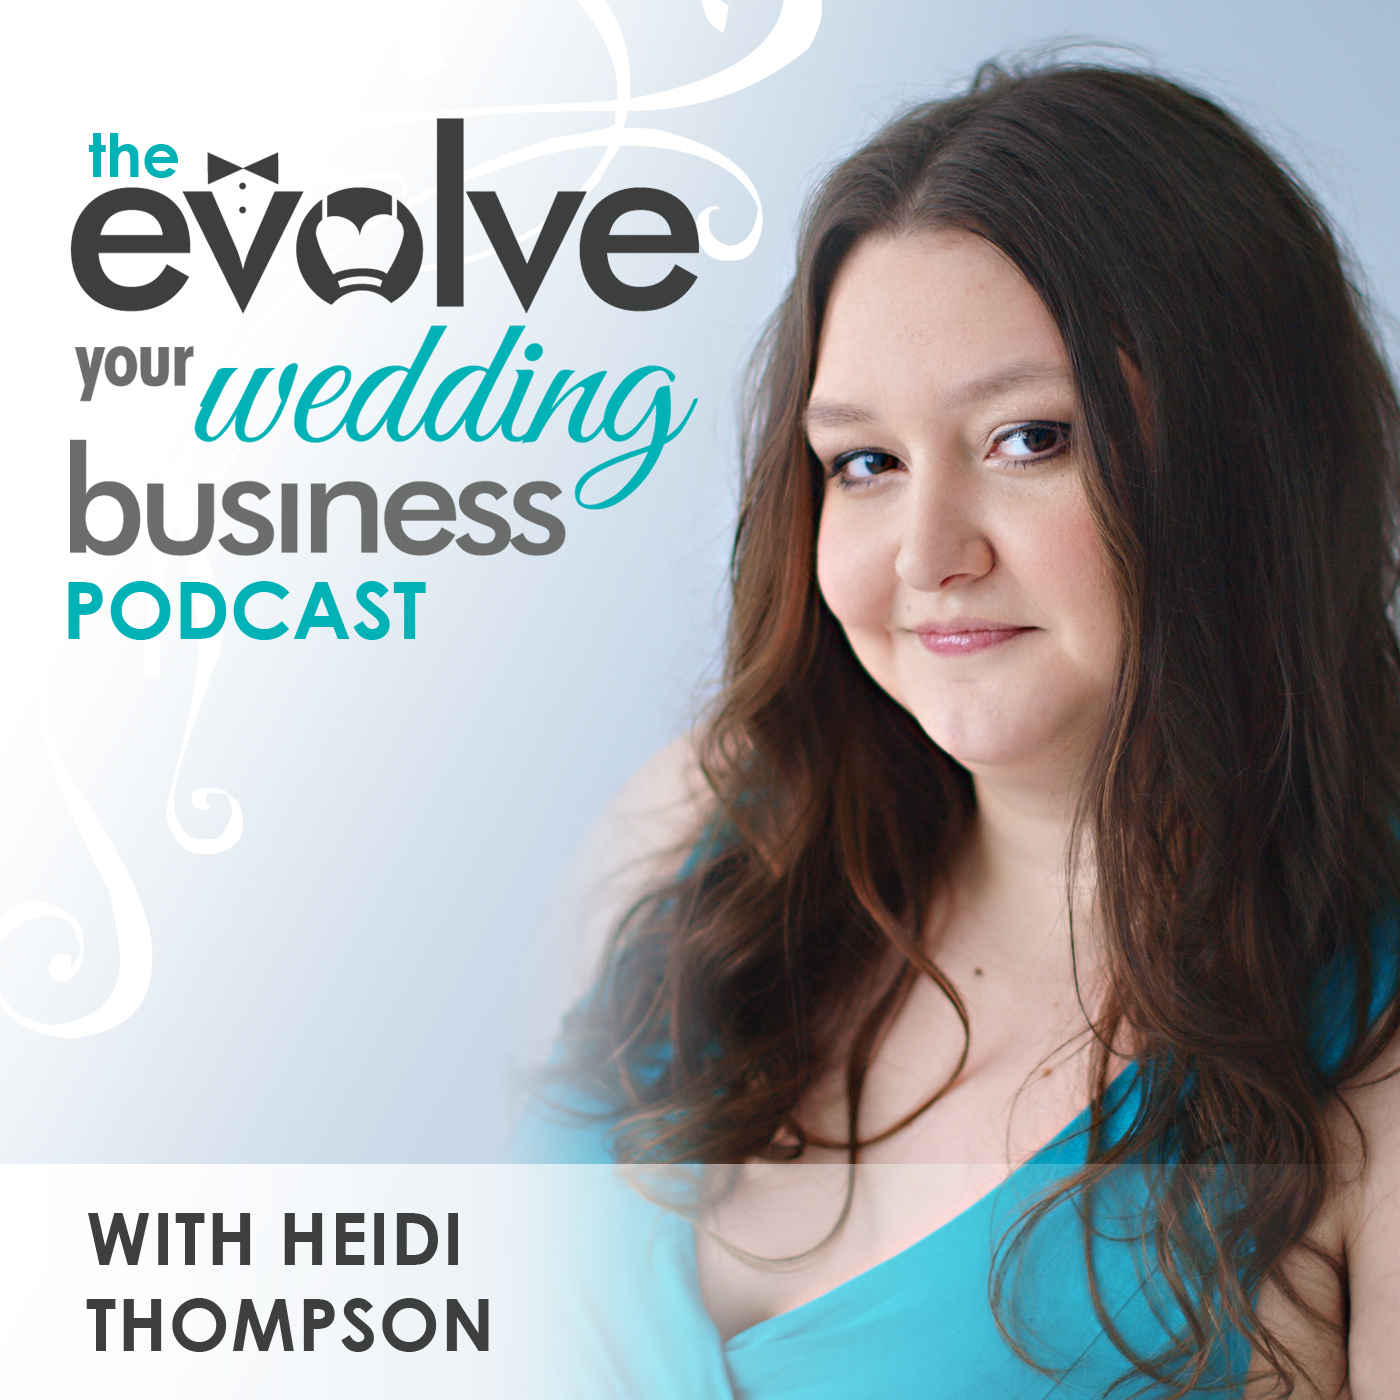 The Evolve Your Wedding Business Podcast: Marketing For Your Wedding Business | Online Business